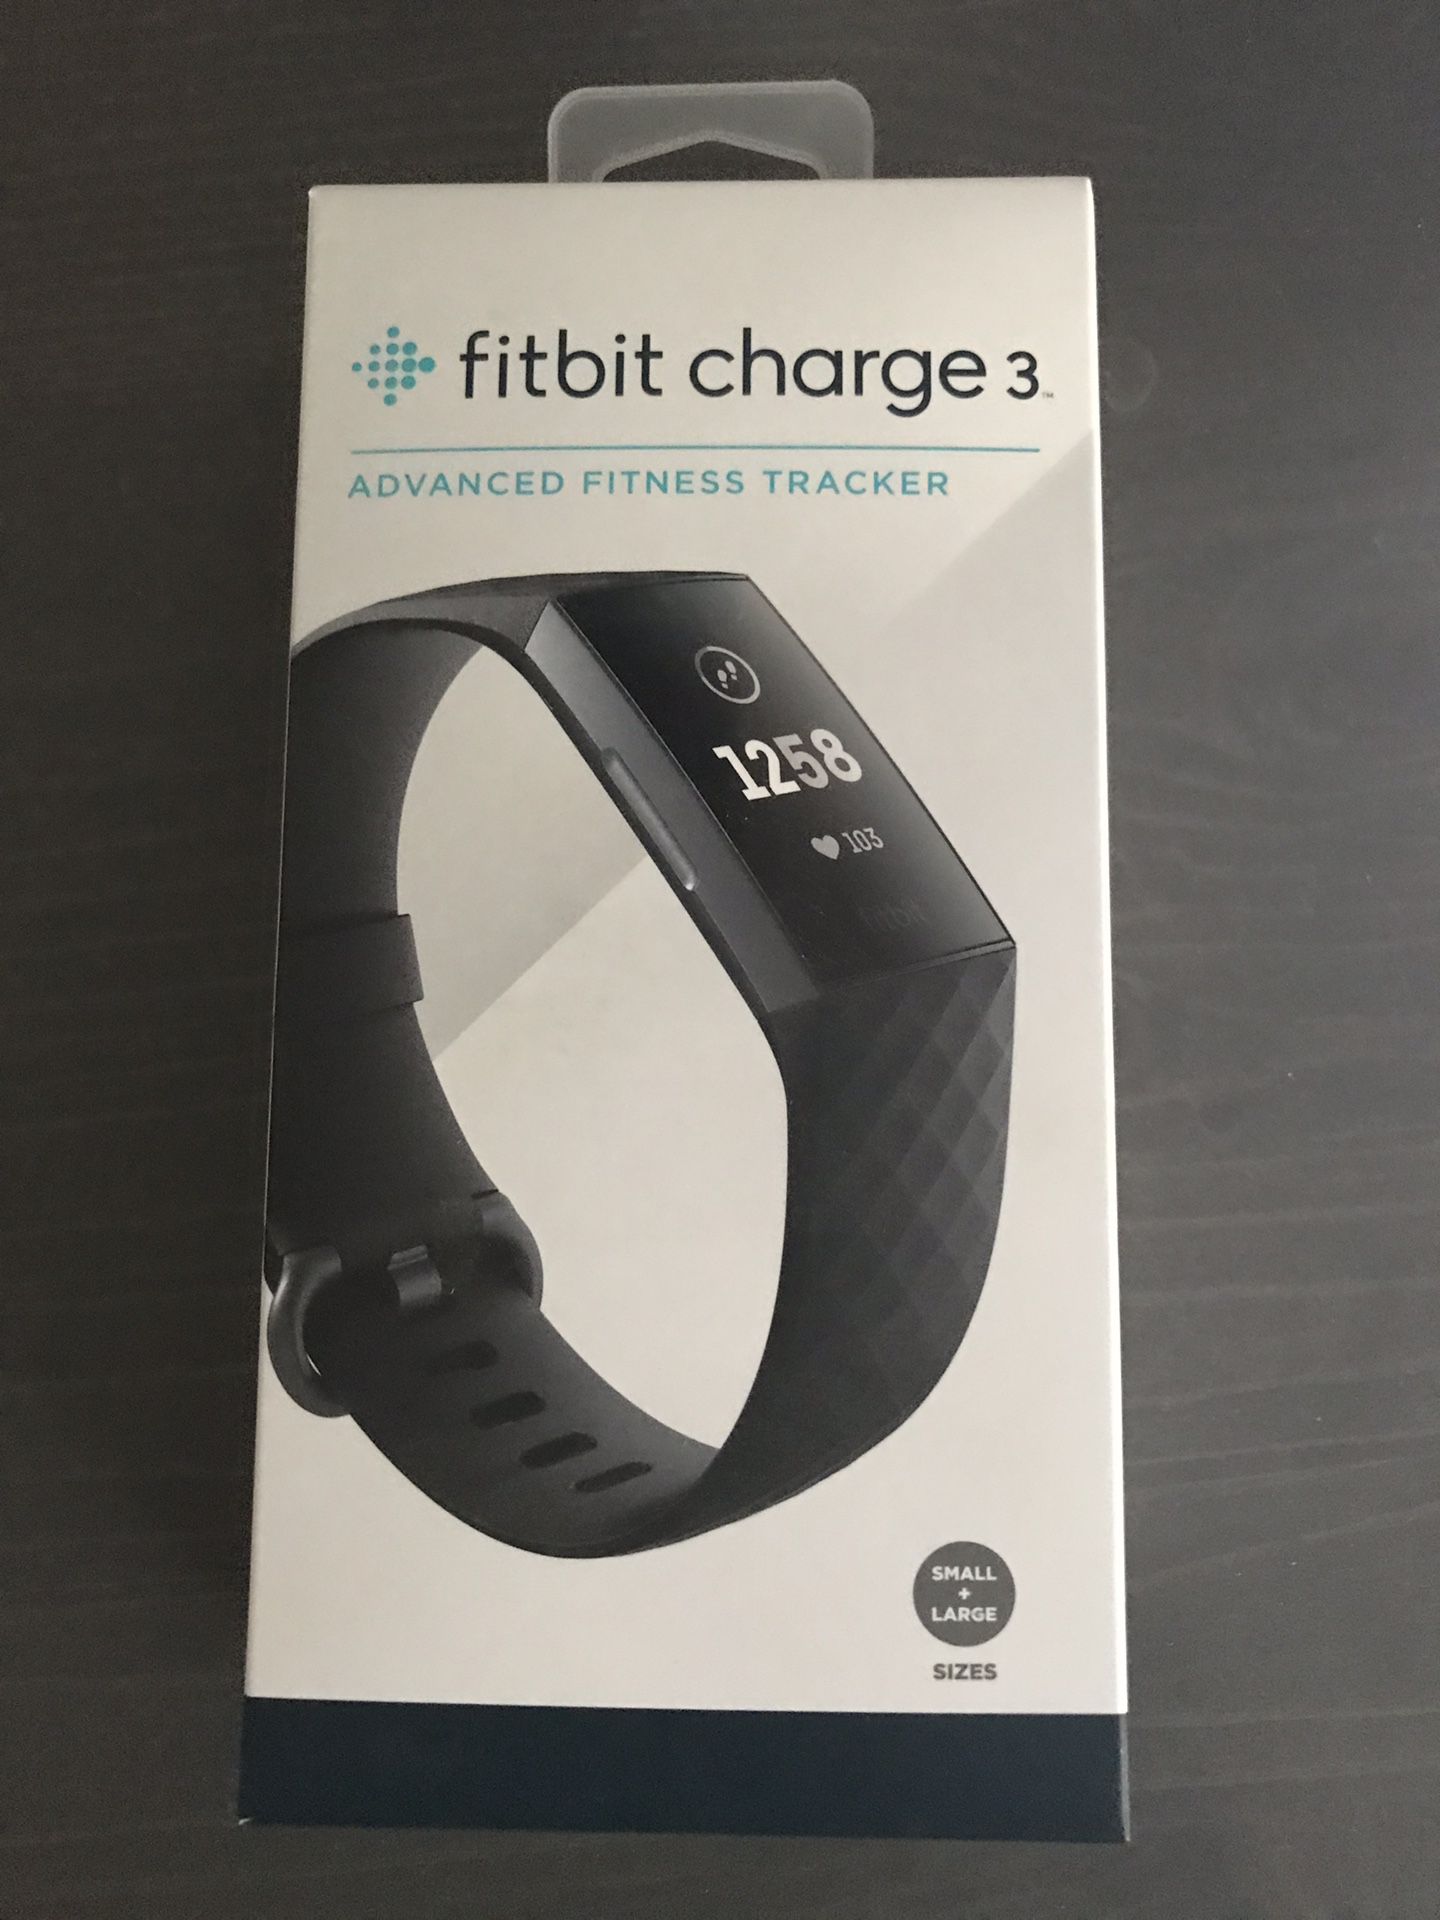 Fitbit Charge 3 - looking to trade for Apple AirPods Gen2